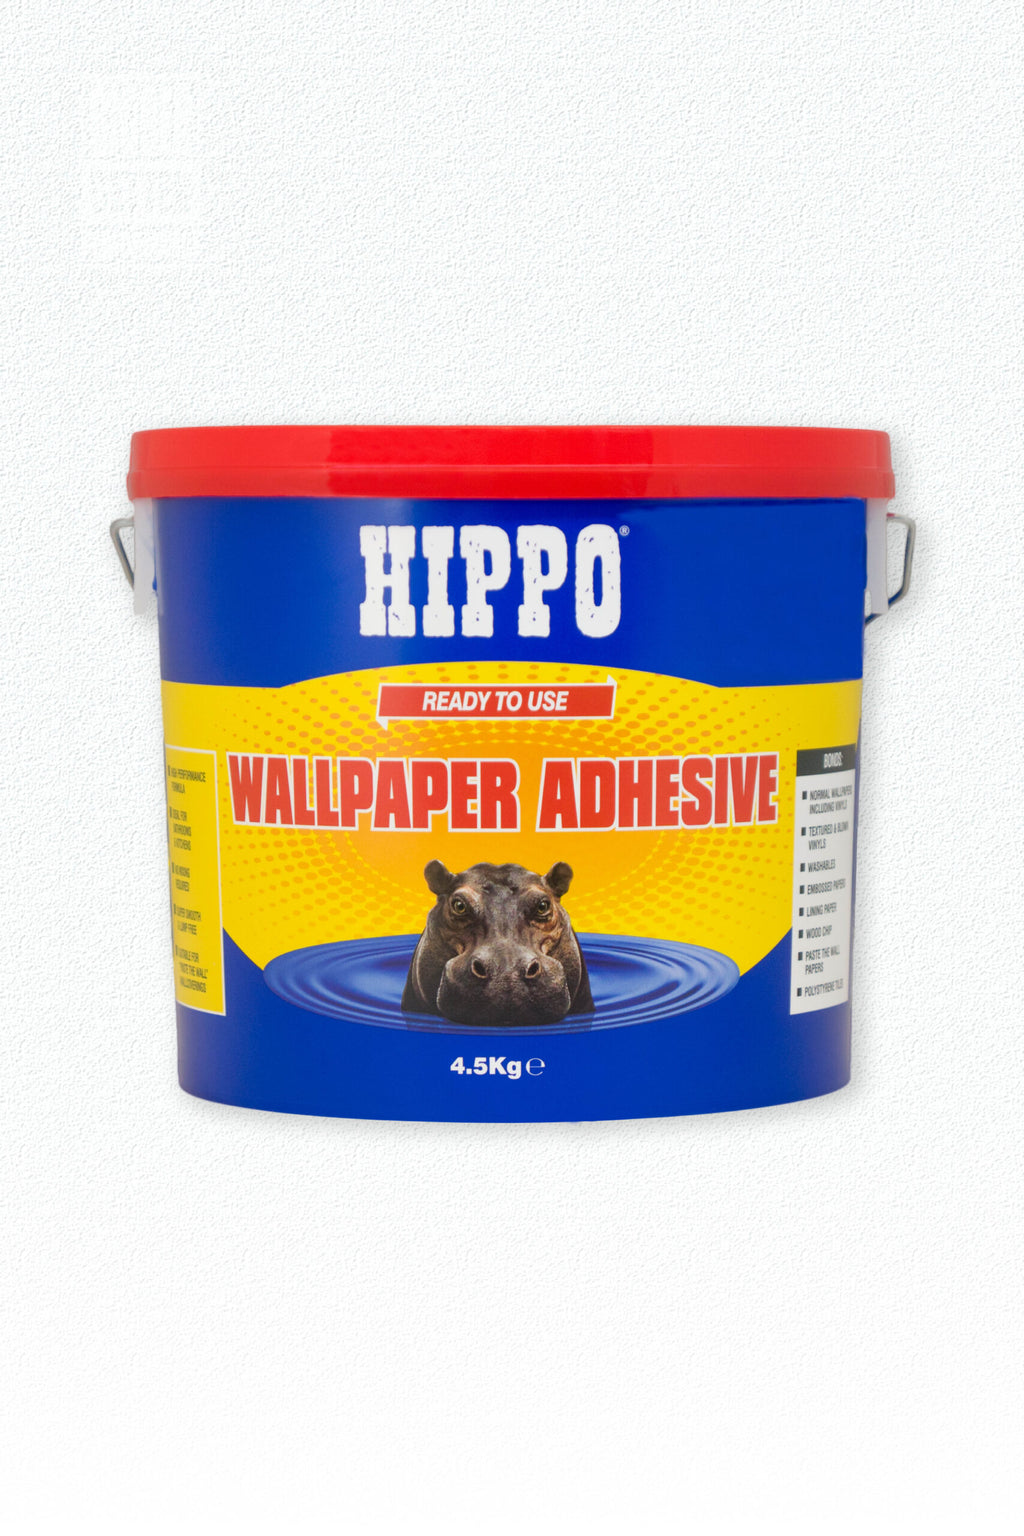 Hippo Ready To Use Wallpaper Adhesive – My Trade Products